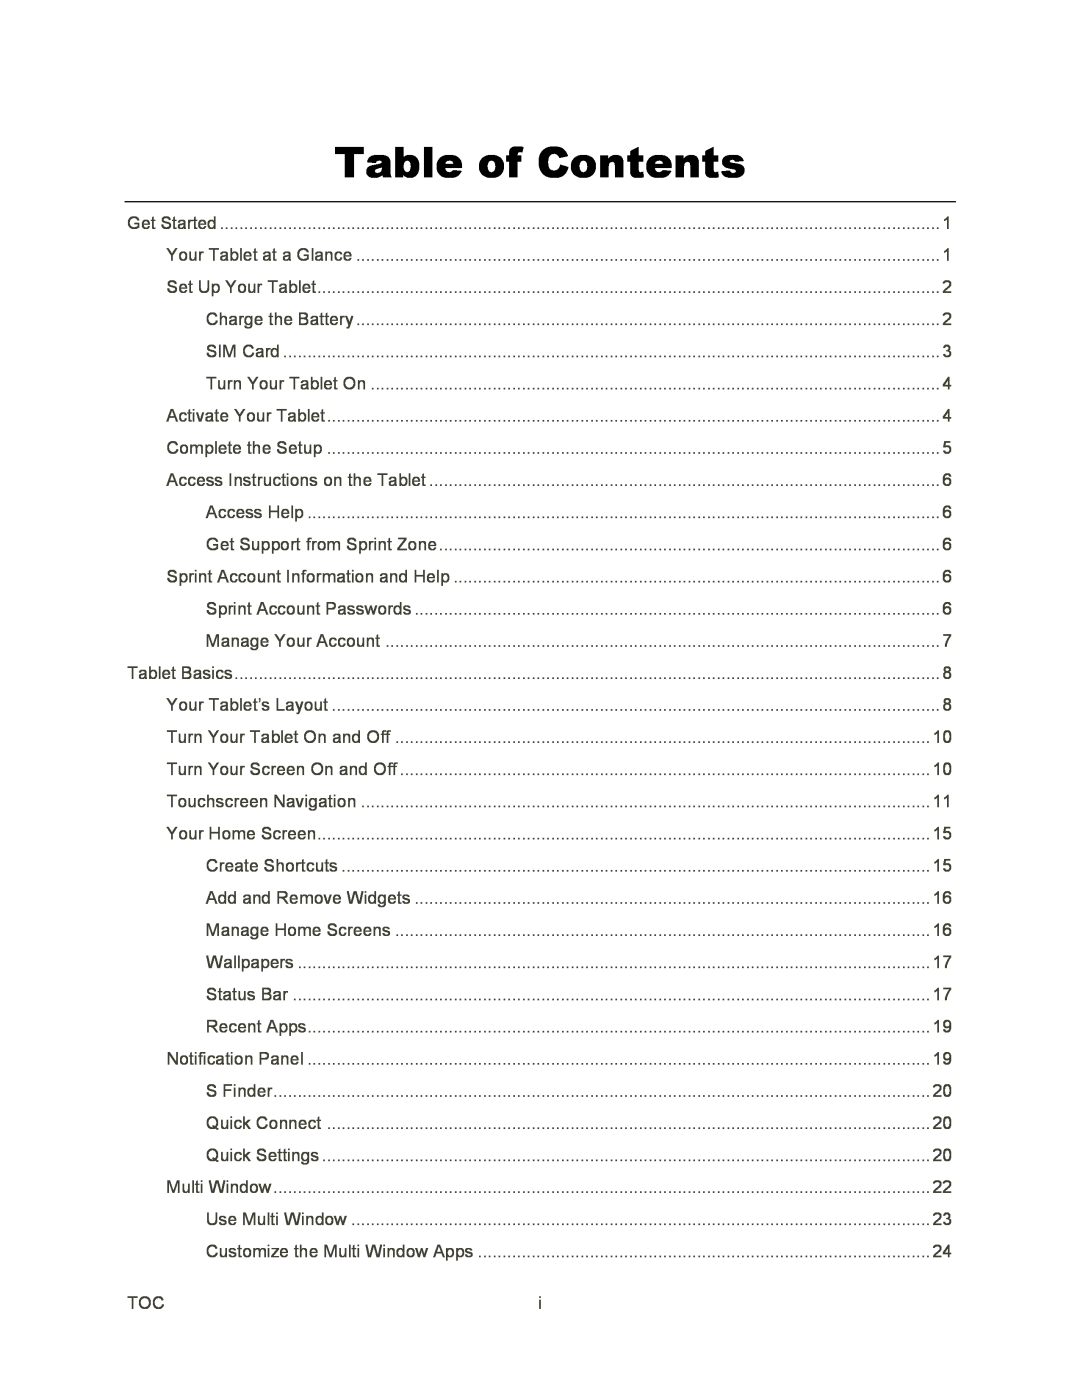 Table of Contents Galaxy Tab S 10.5 Sprint